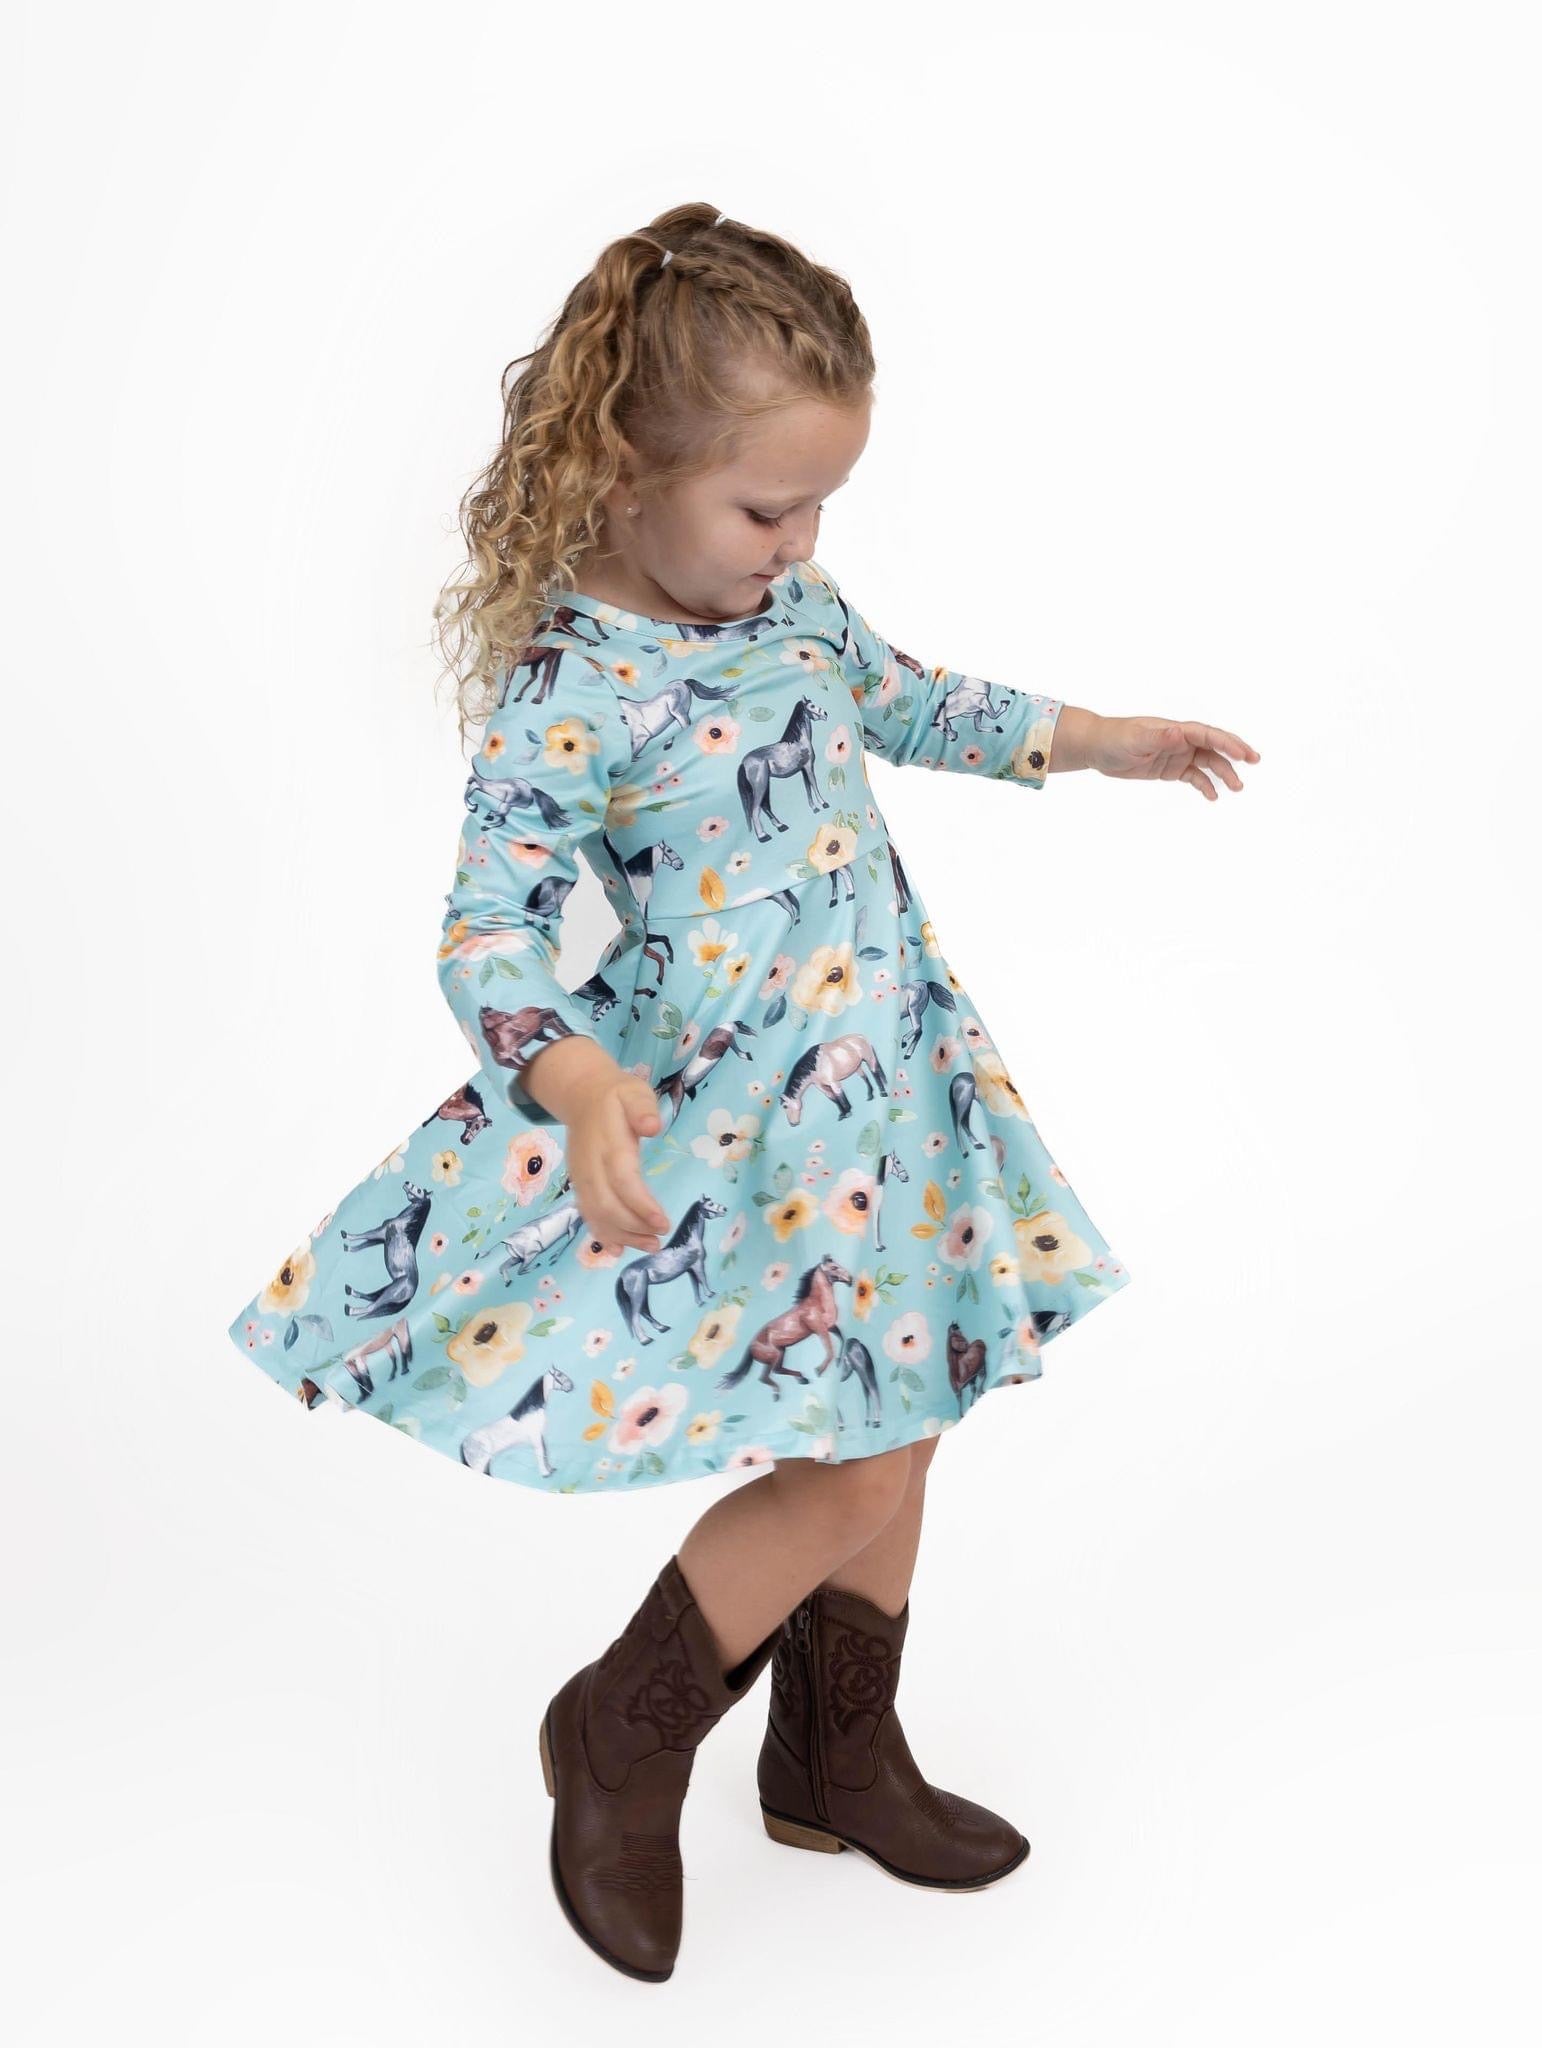 Gallop Away Dress by Pete and Lucy